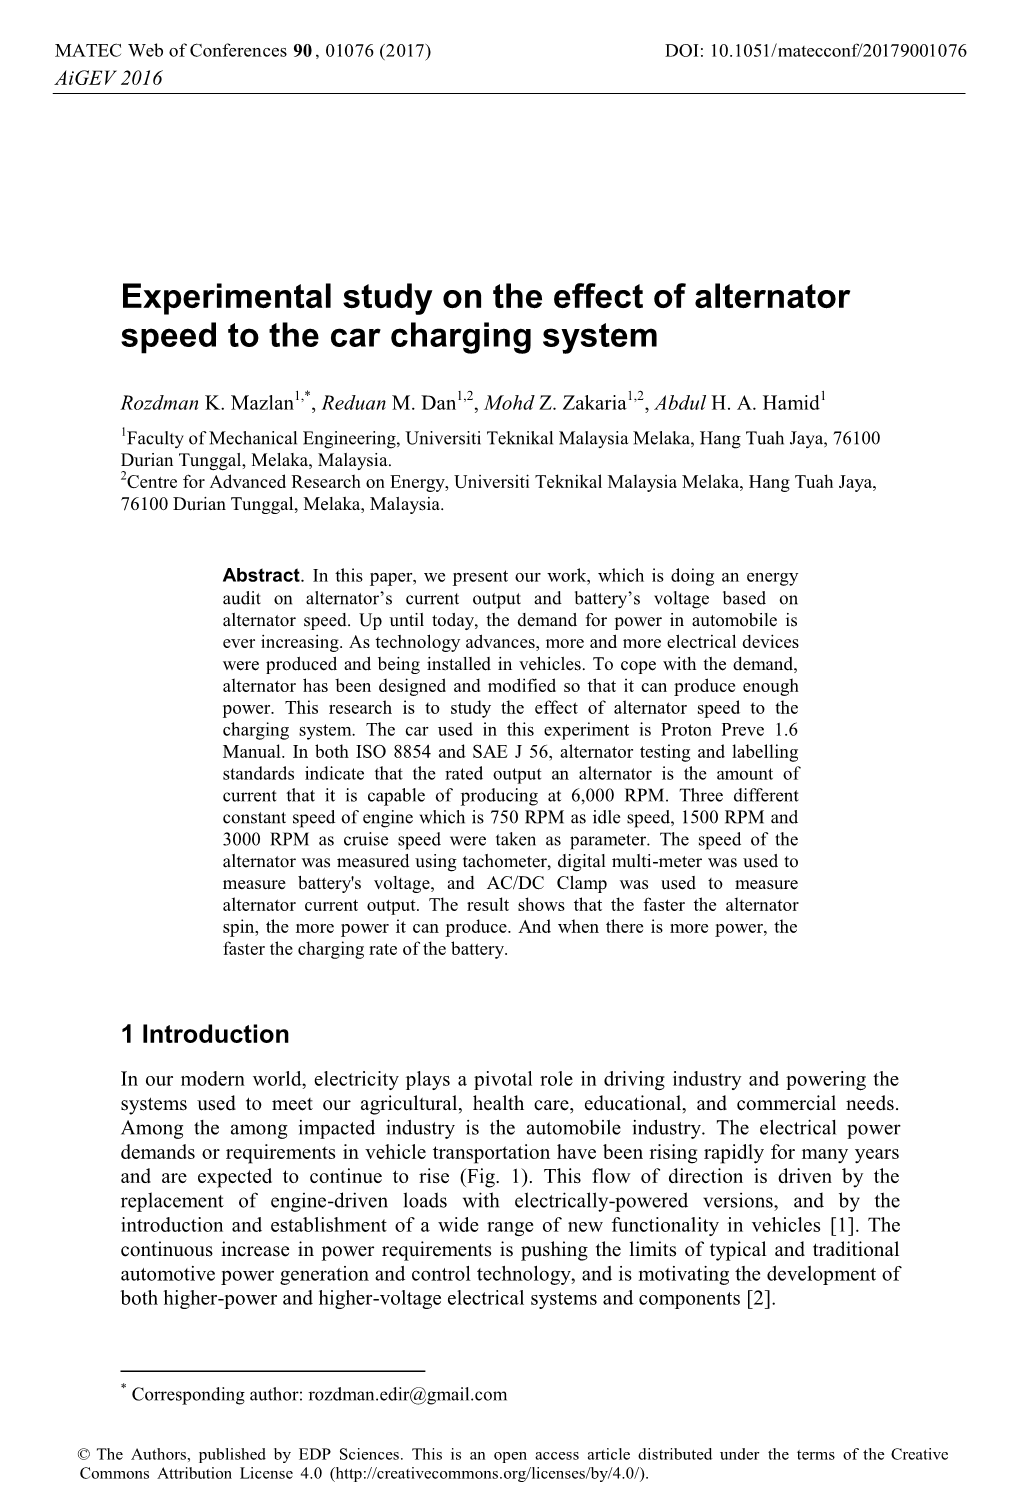 Experimental Study on the Effect of Alternator Speed to the Car Charging System